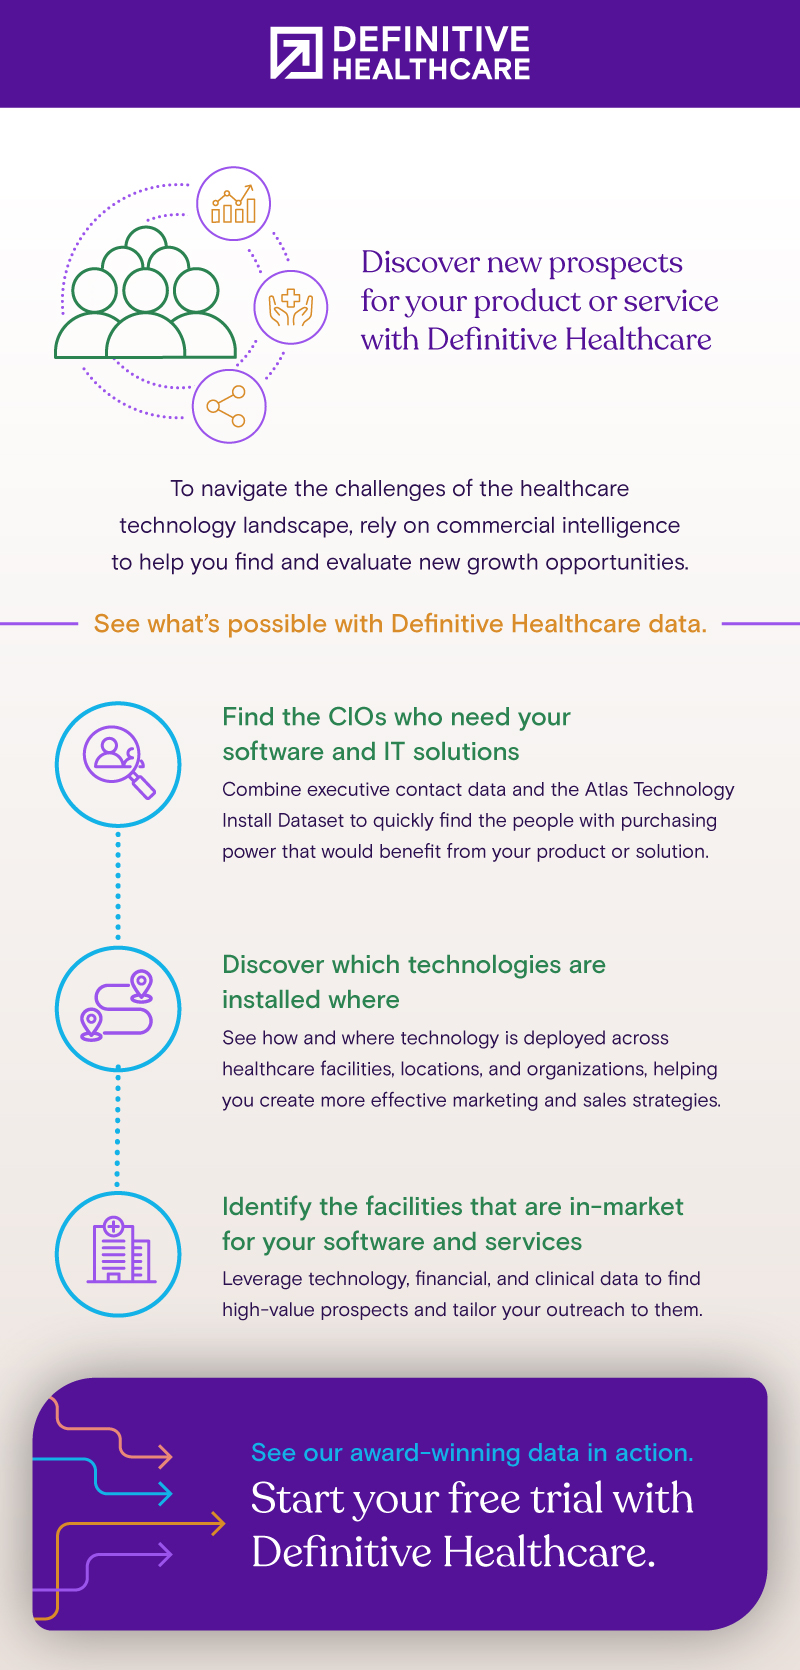 Discover new prospects for your product or service with Definitive Healthcare